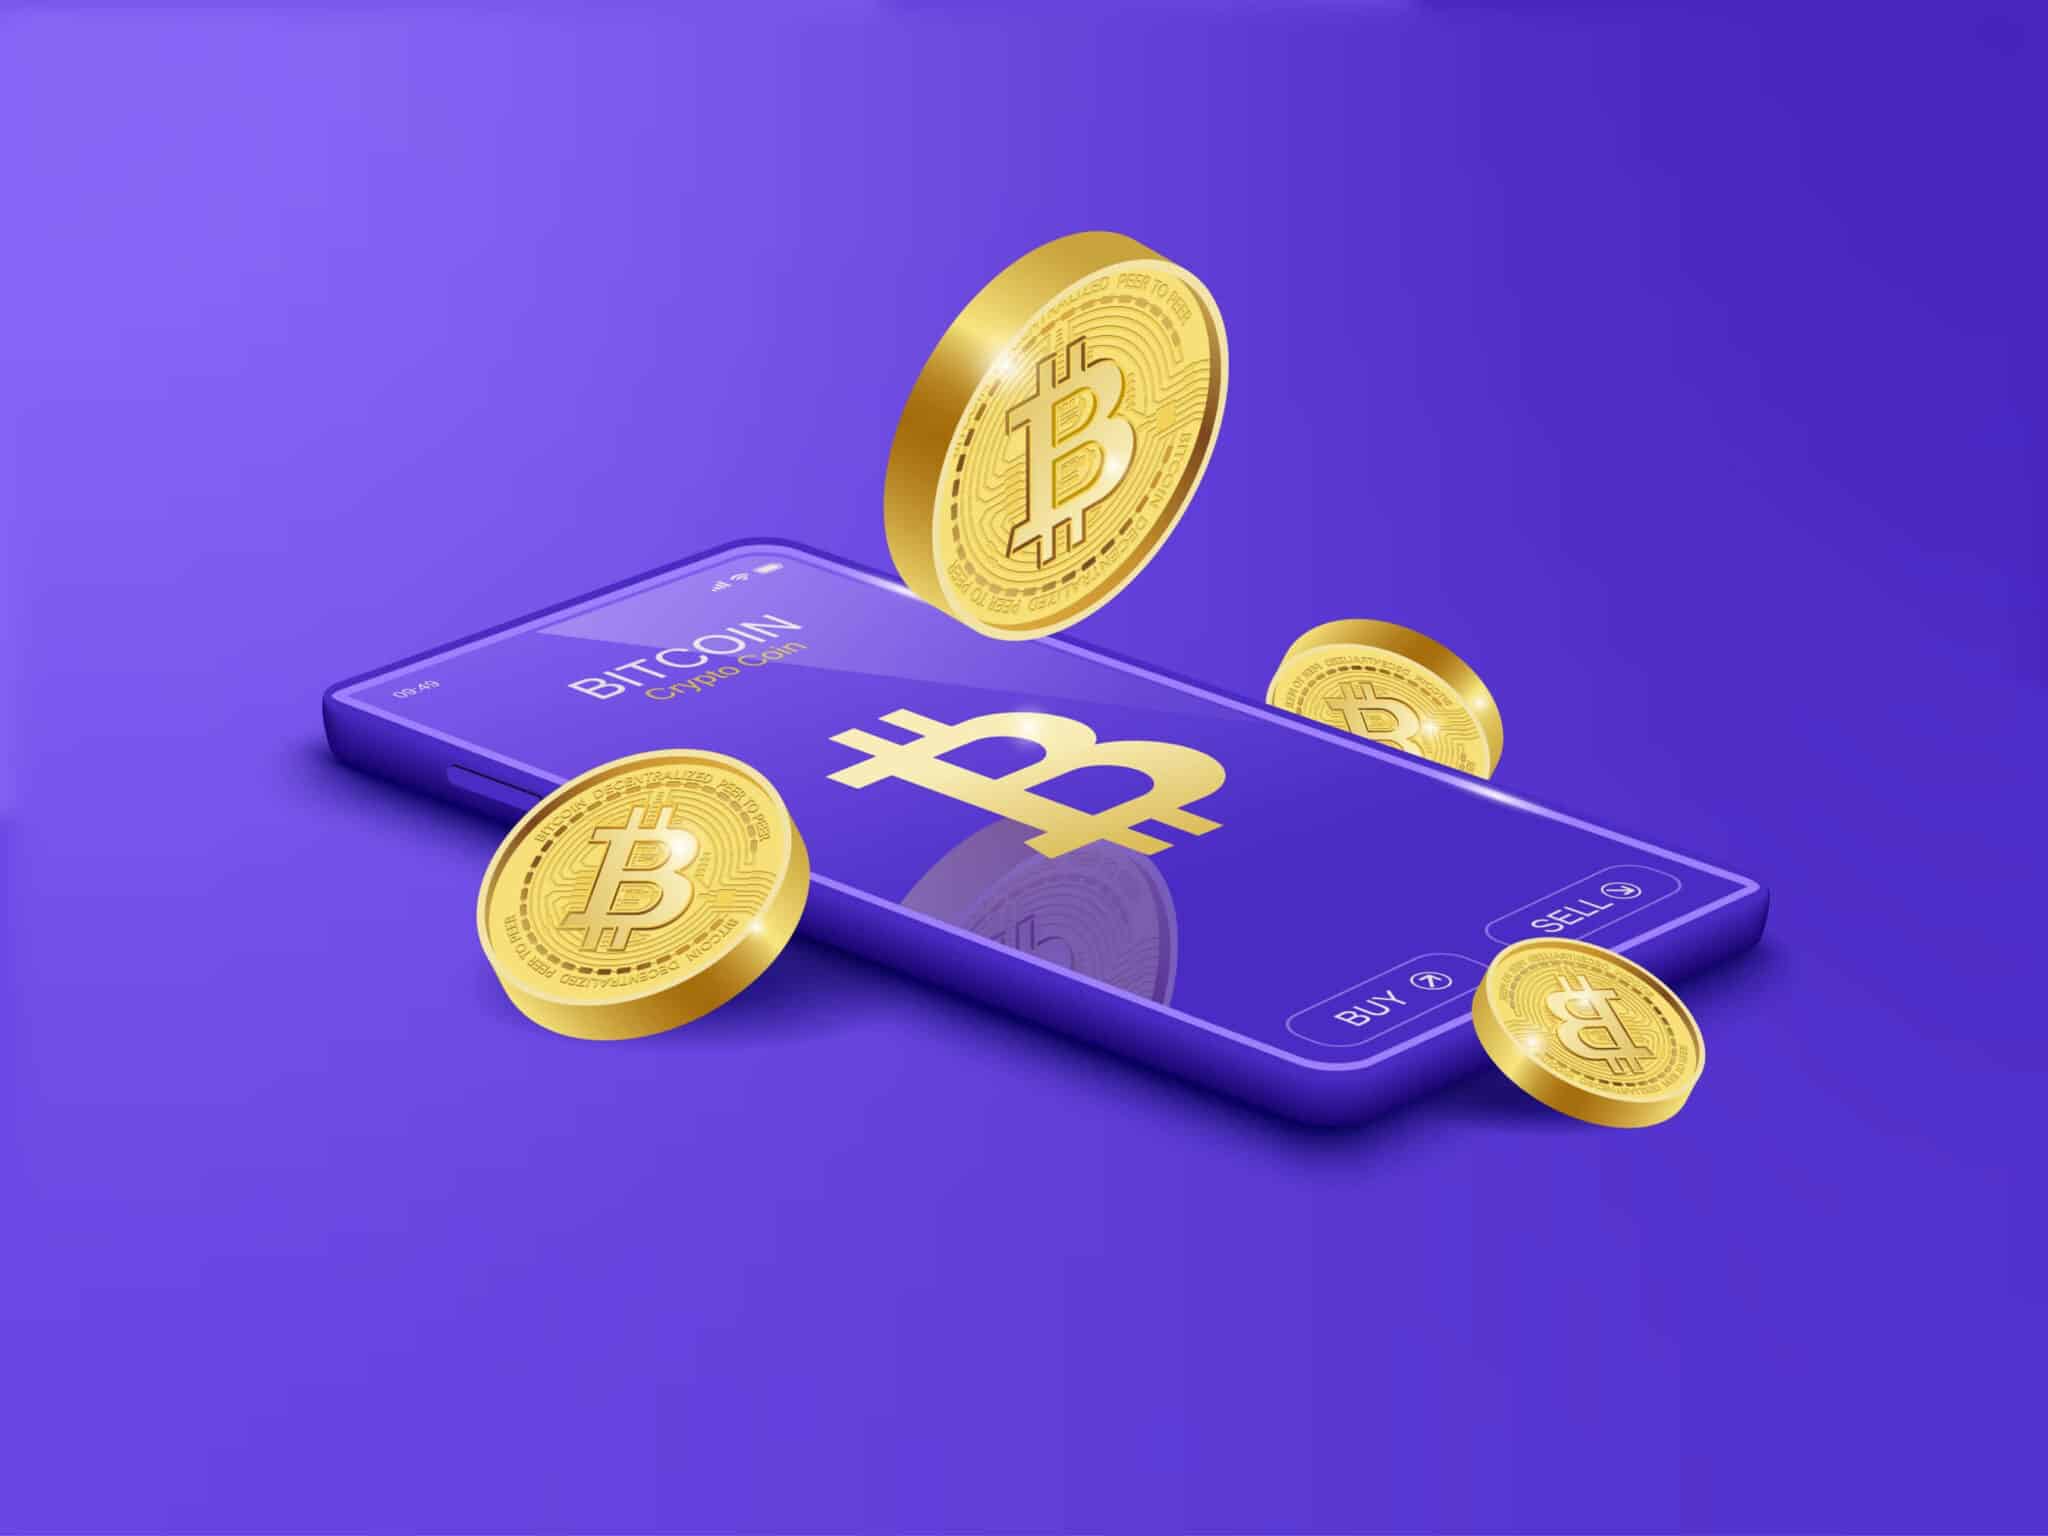 Illustration of Bitcoin revolving around a mobile phone on a purple background.